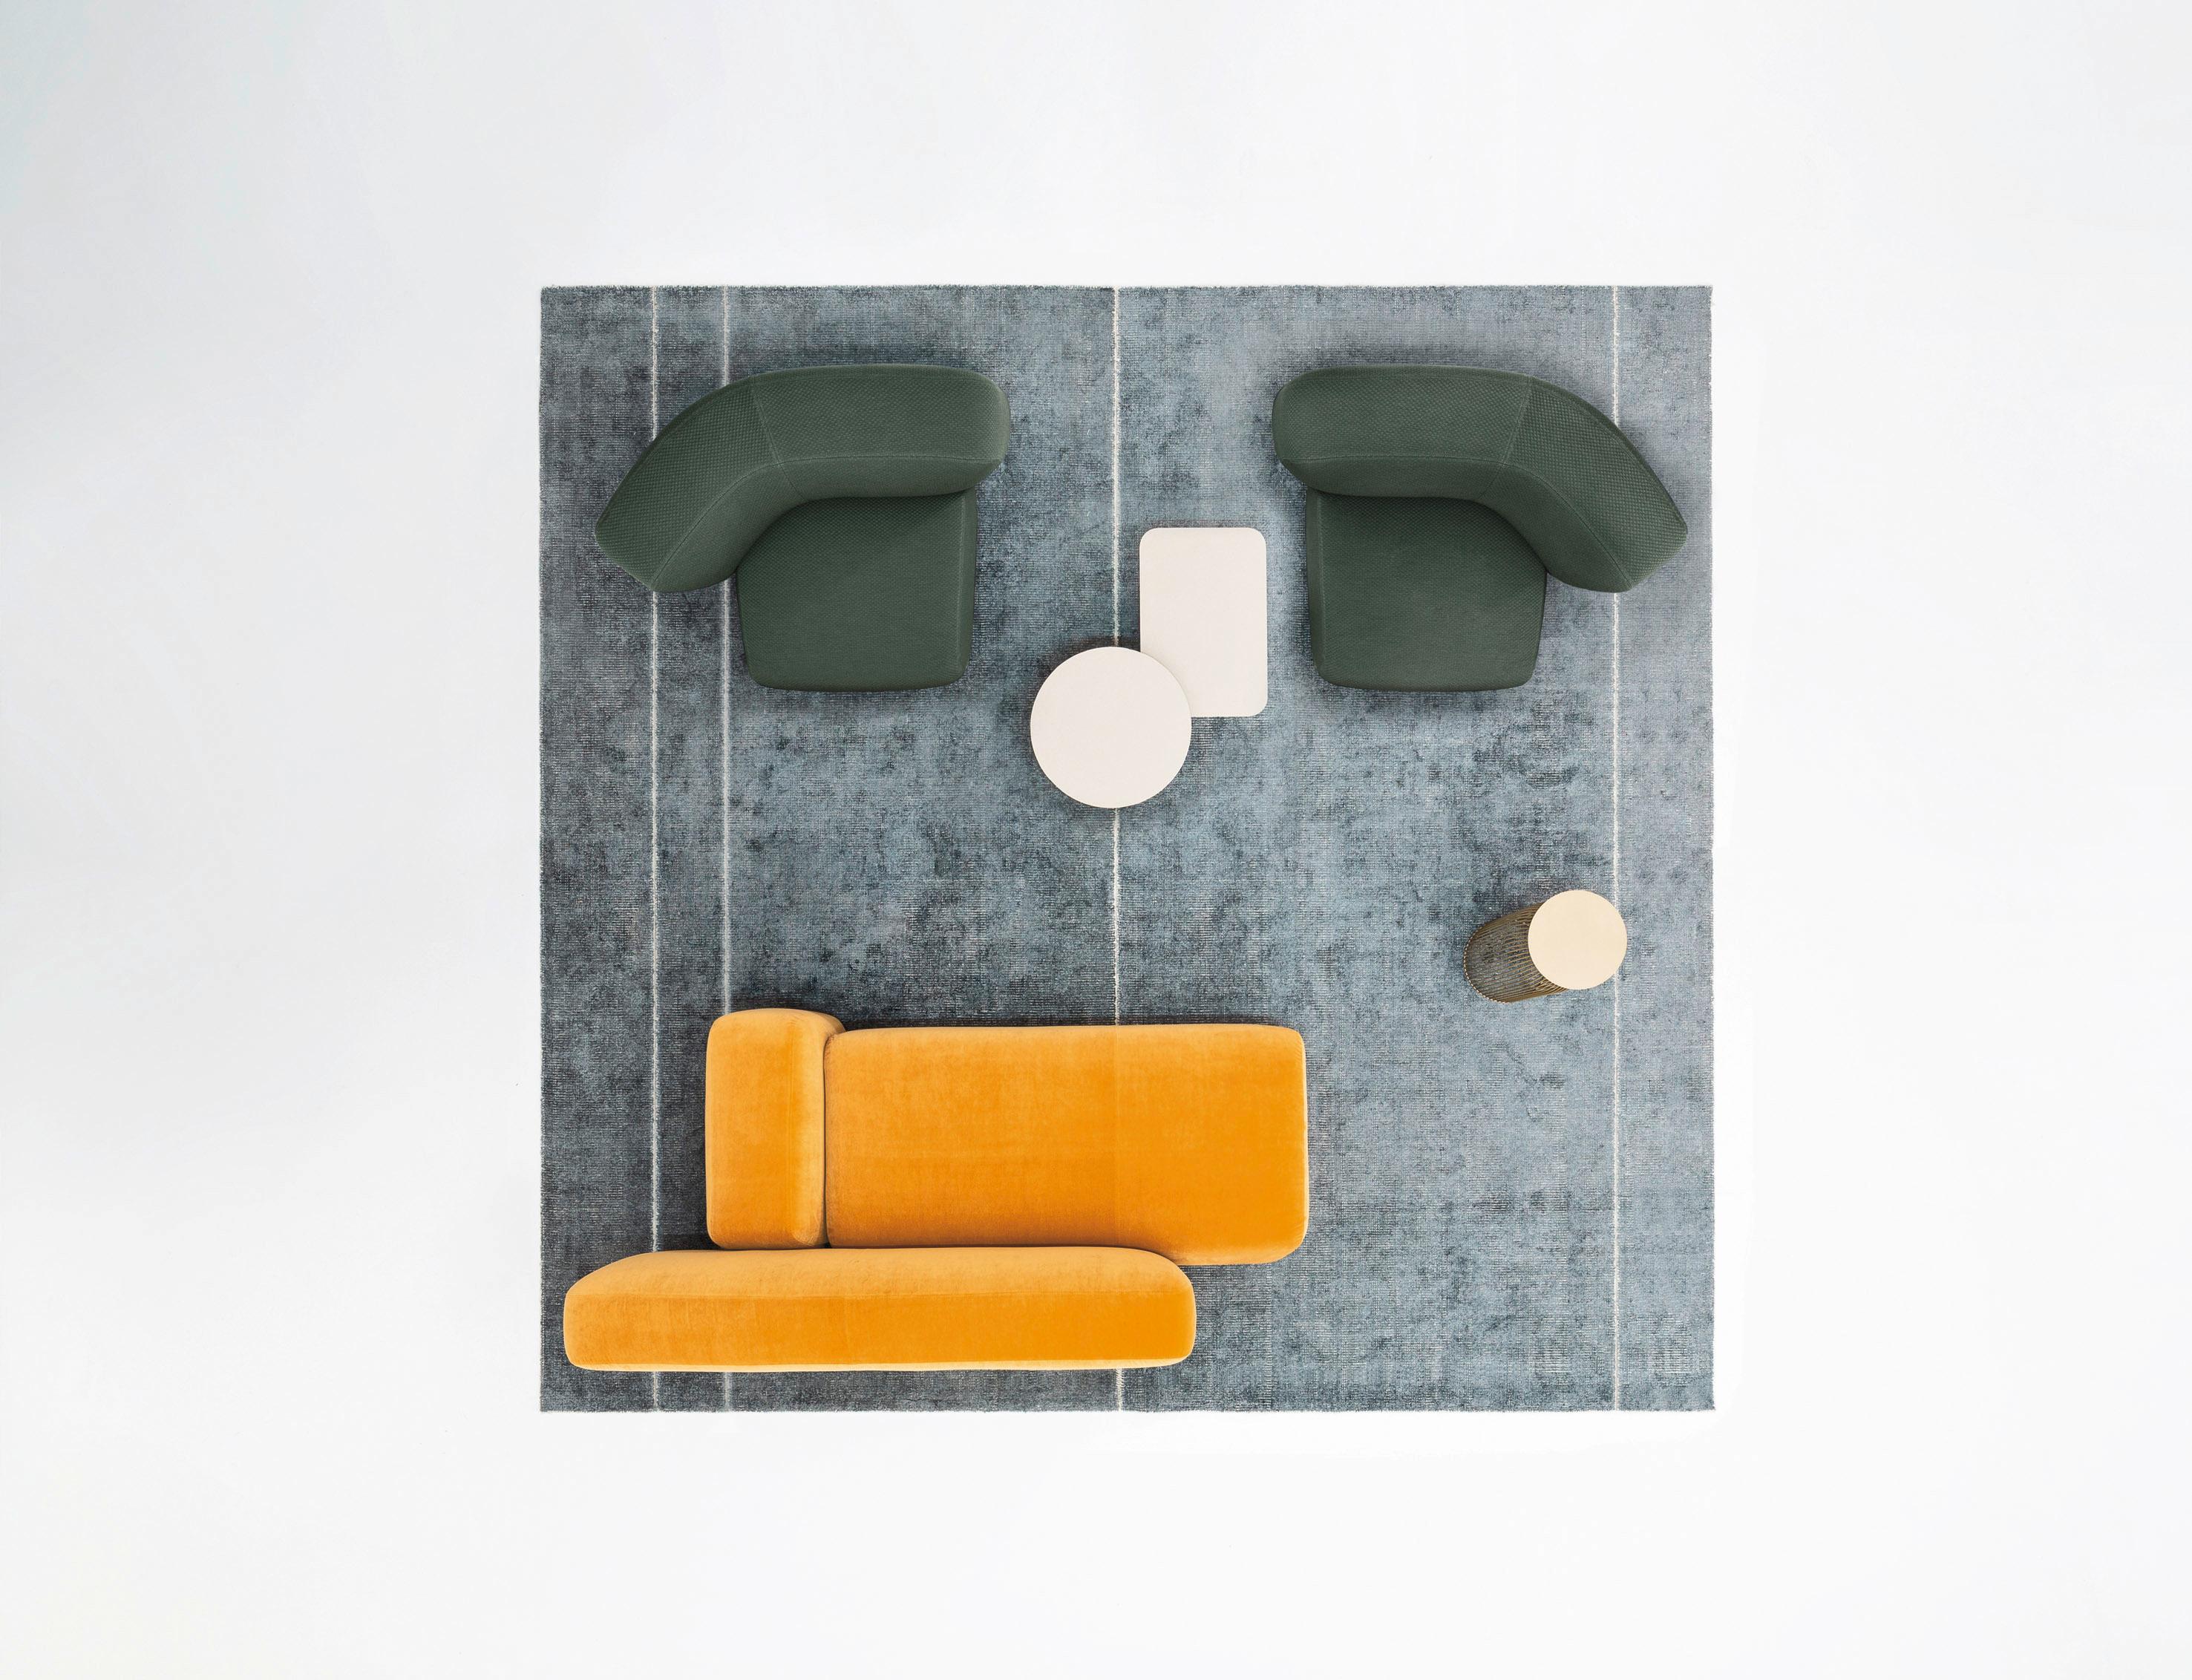 Suiseki left armchair is a collection of padded seats inspired – as its name suggests – by the Japanese art of arranging naturally occurring stones. Spontaneous, harmonious lack of alignment takes the place of geometric shapes in the simple modular